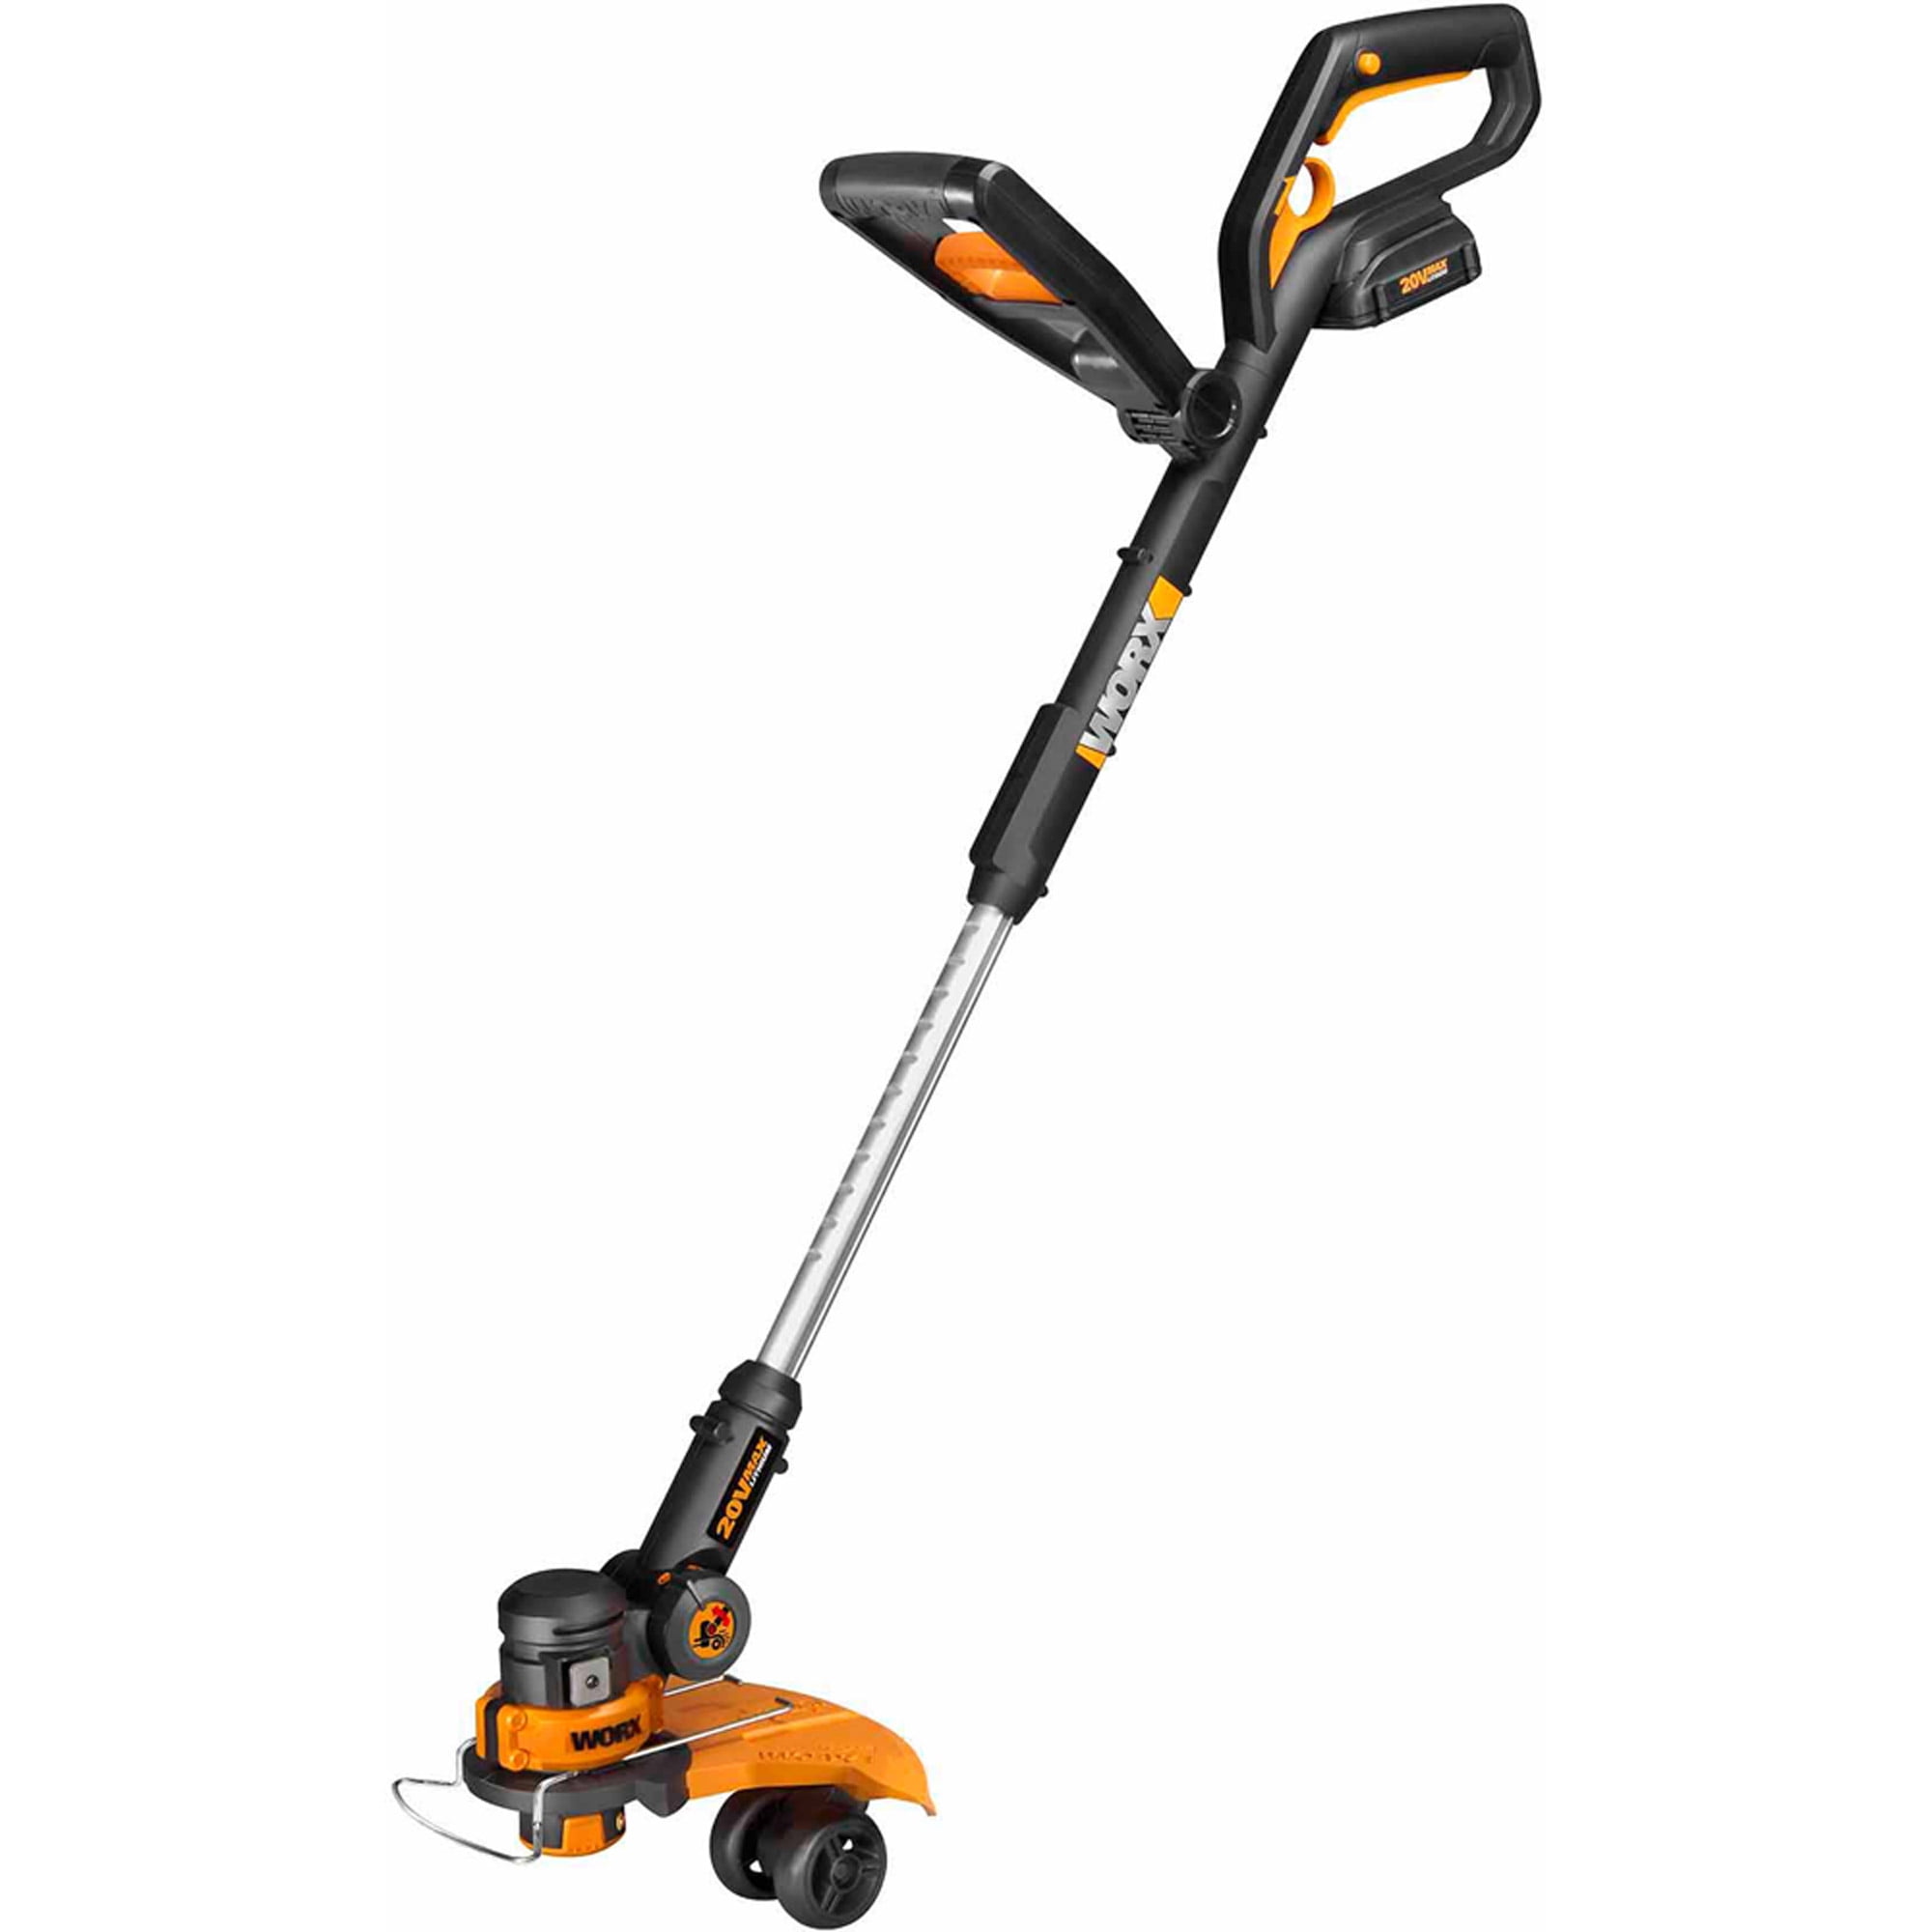 Worx WG160 20V Cordless Lithium Ion 12 in Straight Shaft Trimmer